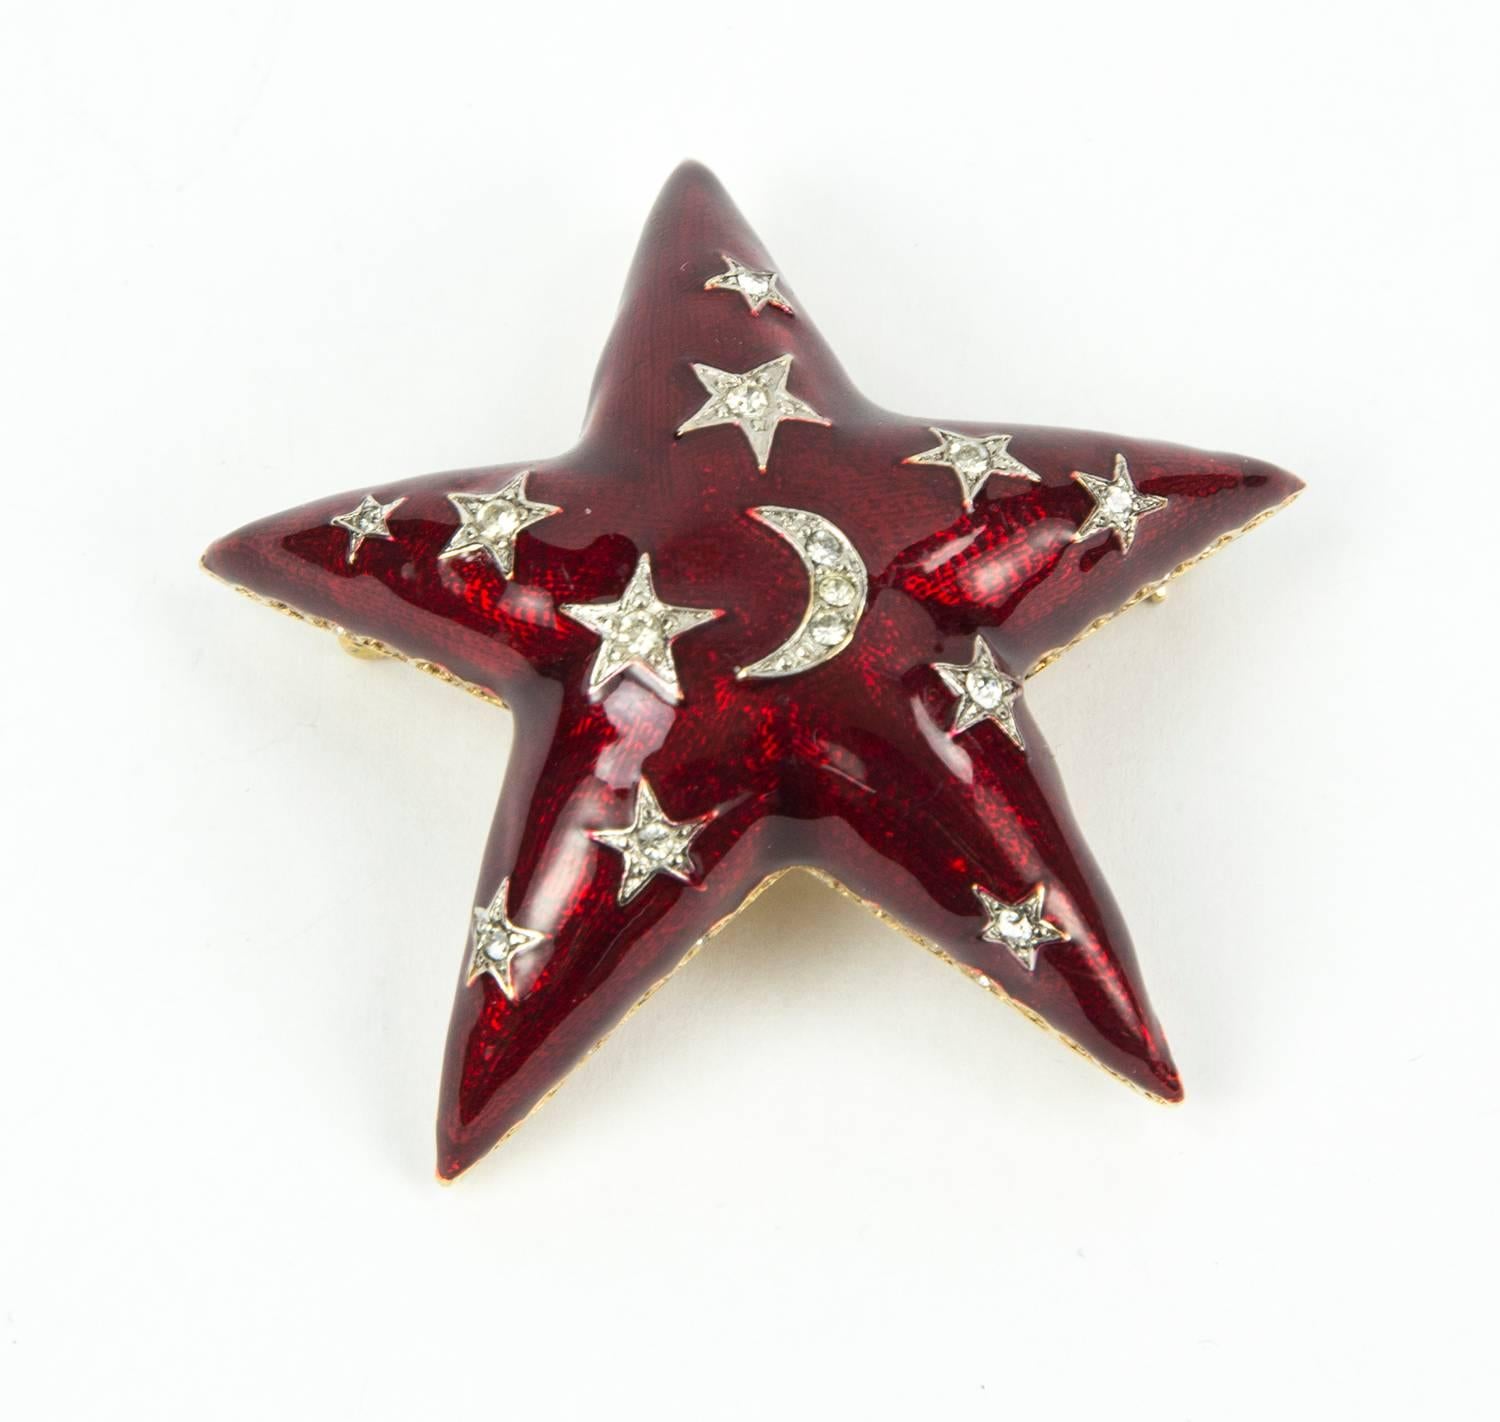 Celestial and Sparkling…These Beautiful Gold tone Butler & Wilson Planet design pins show Rich Red Enamel, set with the brightest Swarovski Rhinestones. Stand out from the crowd. Perfect for dressing up any outfit. Approx. sizes of Saturn 1'' x